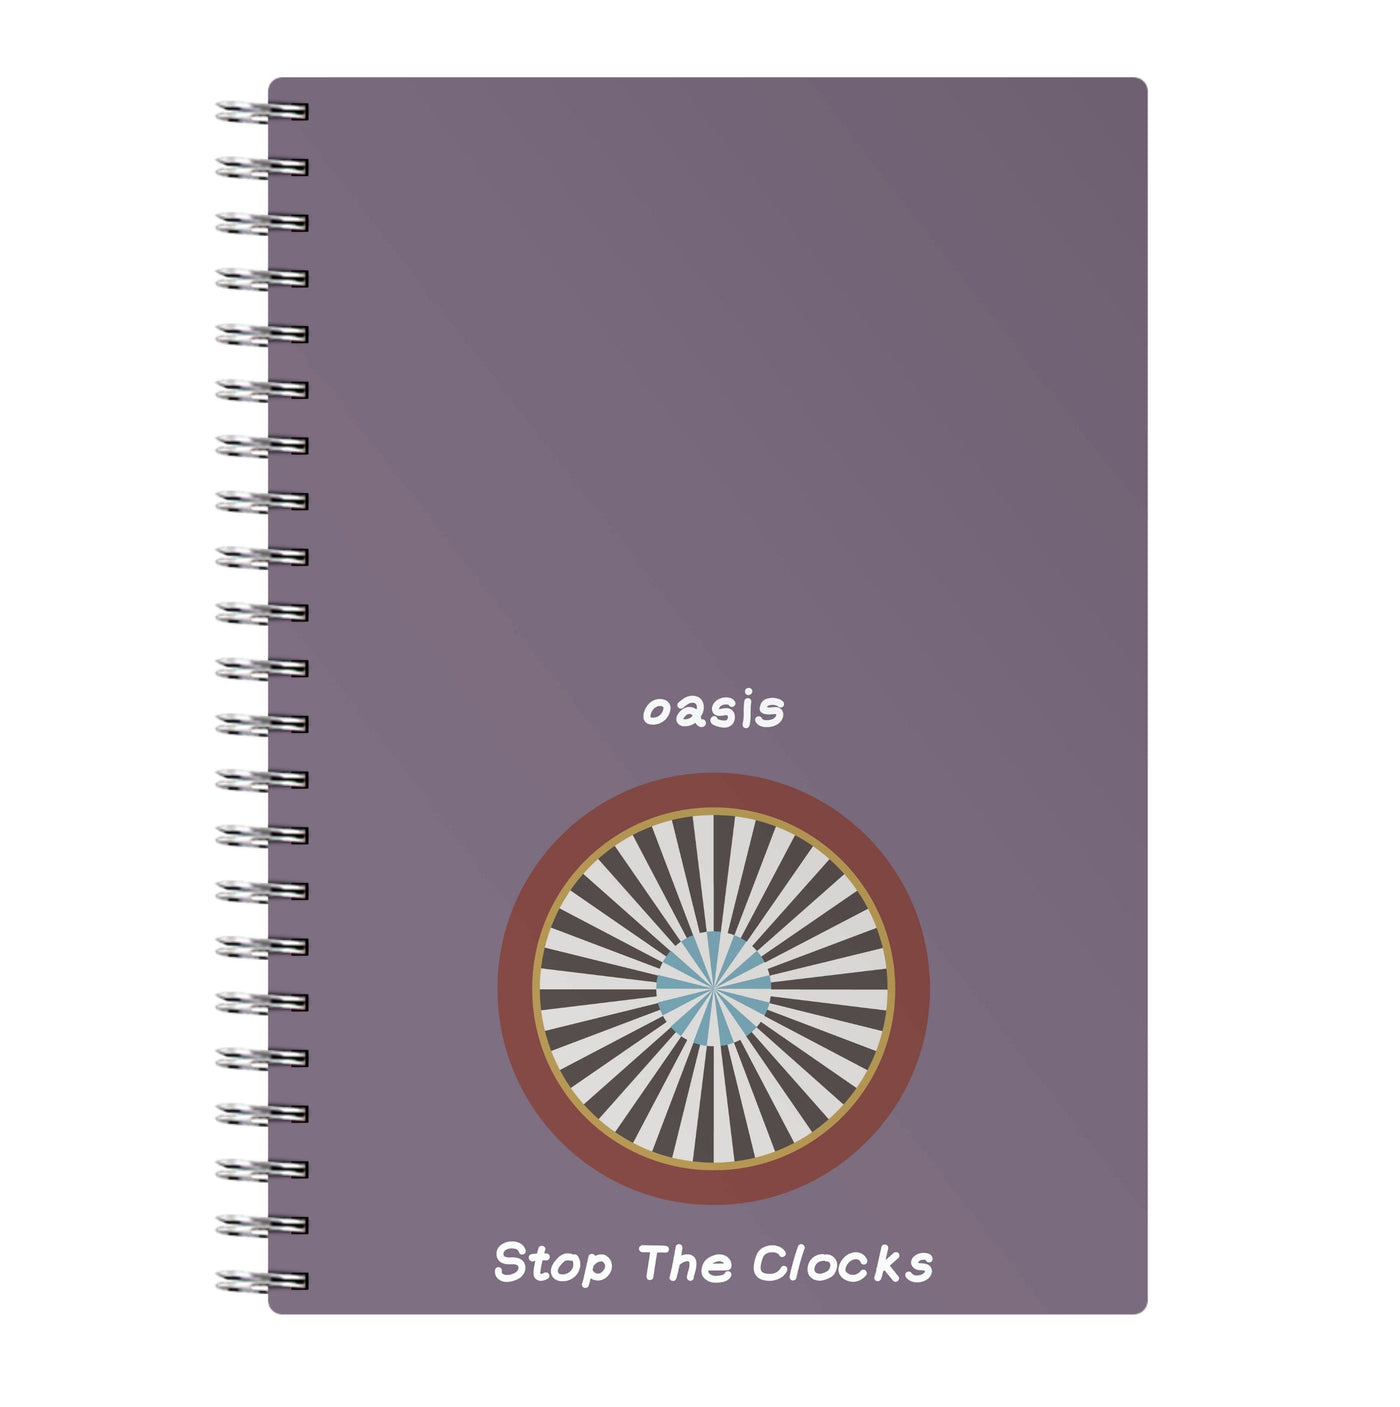 Stop The Clocks - Oasis Notebook